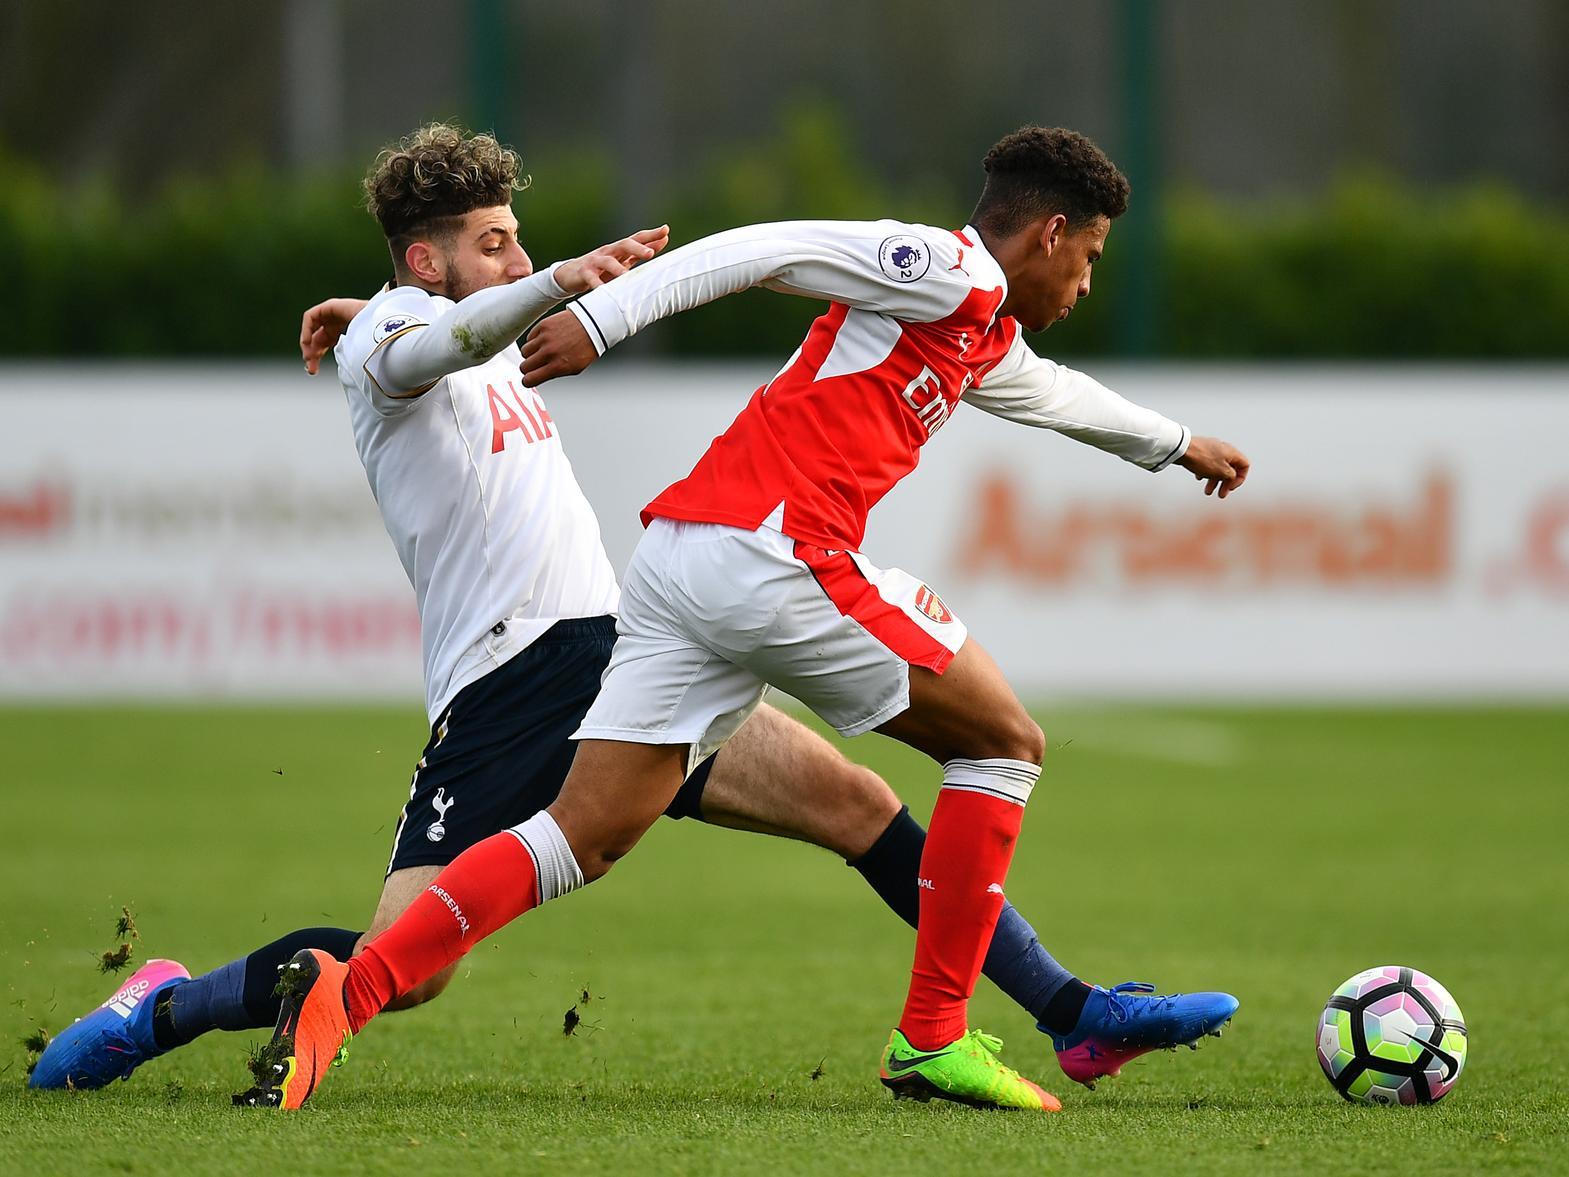 Nottingham Forest have completed the signing of ex-Arsenal and Barcelona youngster Marcus McGuane, who was released by the Catalan giants last month. (Daily Mail)